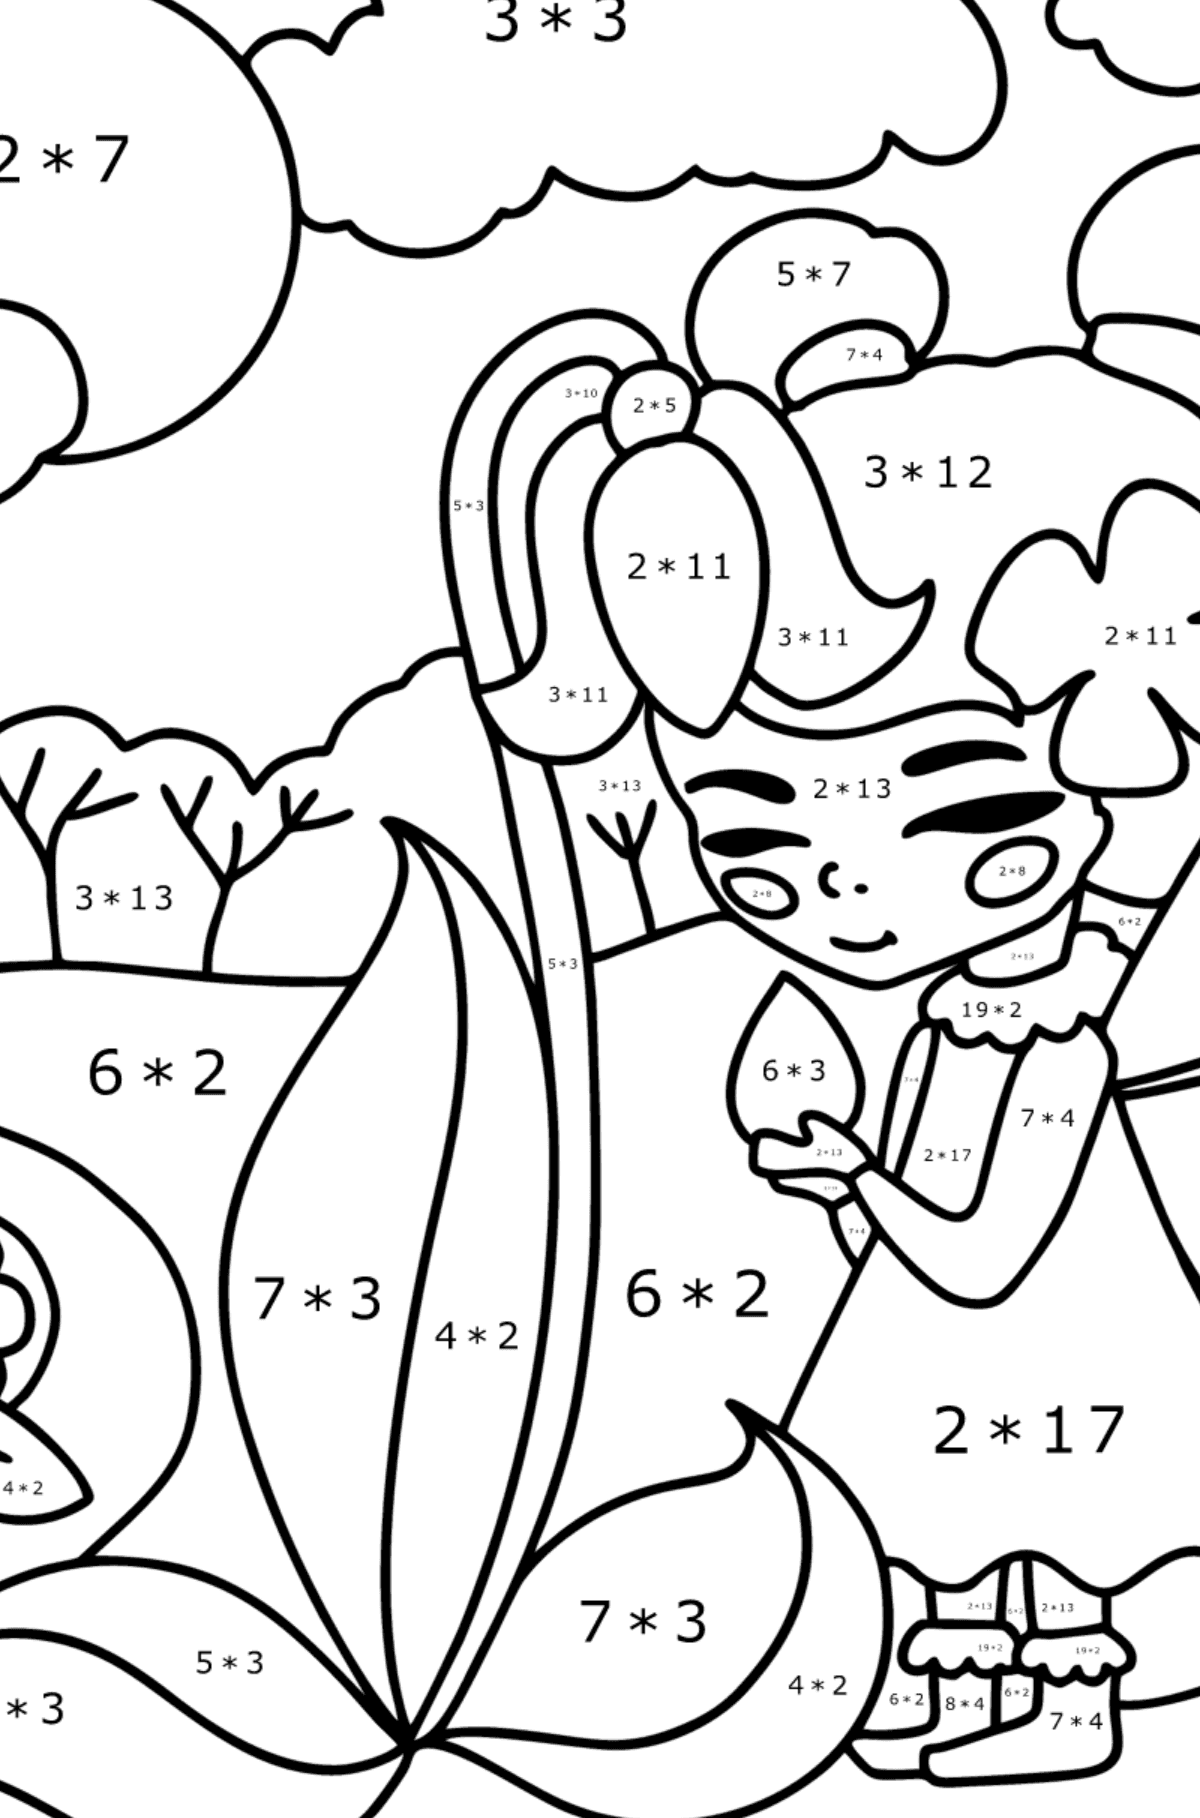 Fairy on a forest path coloring page - Math Coloring - Multiplication for Kids